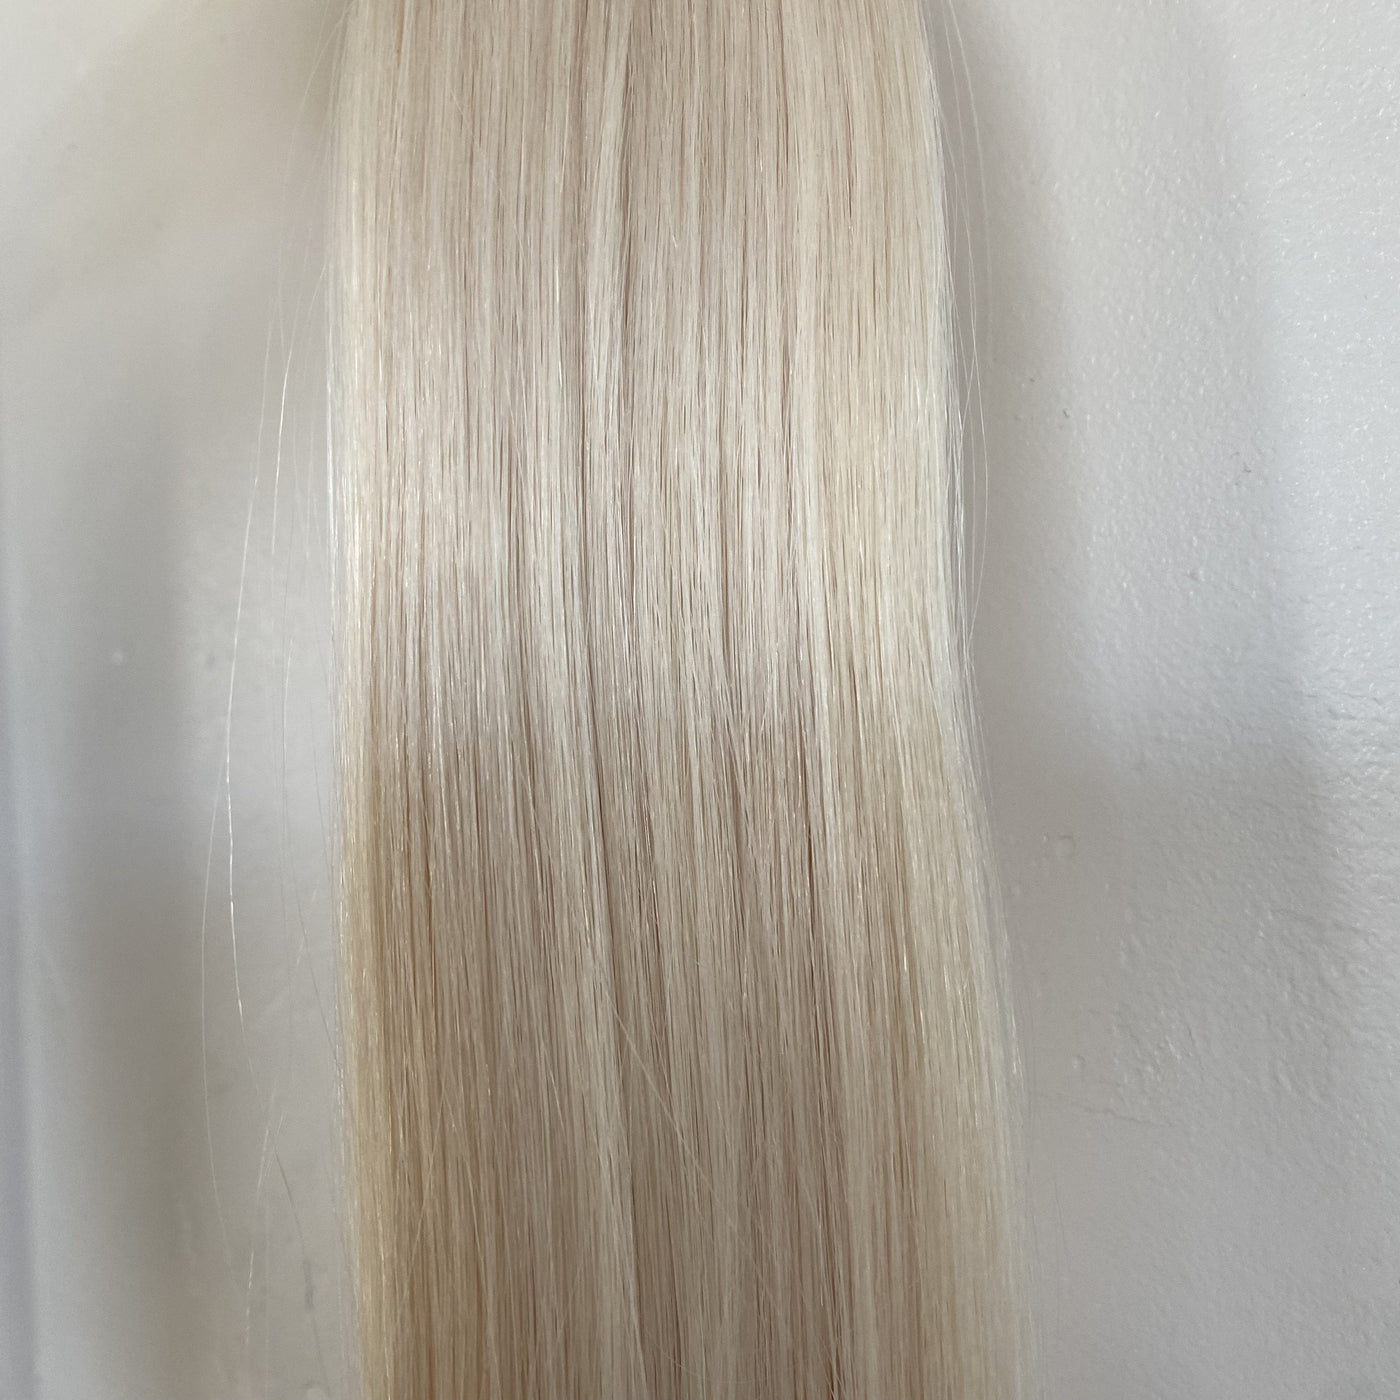 LUXE Halo Hair Extensions | 60a - Dream